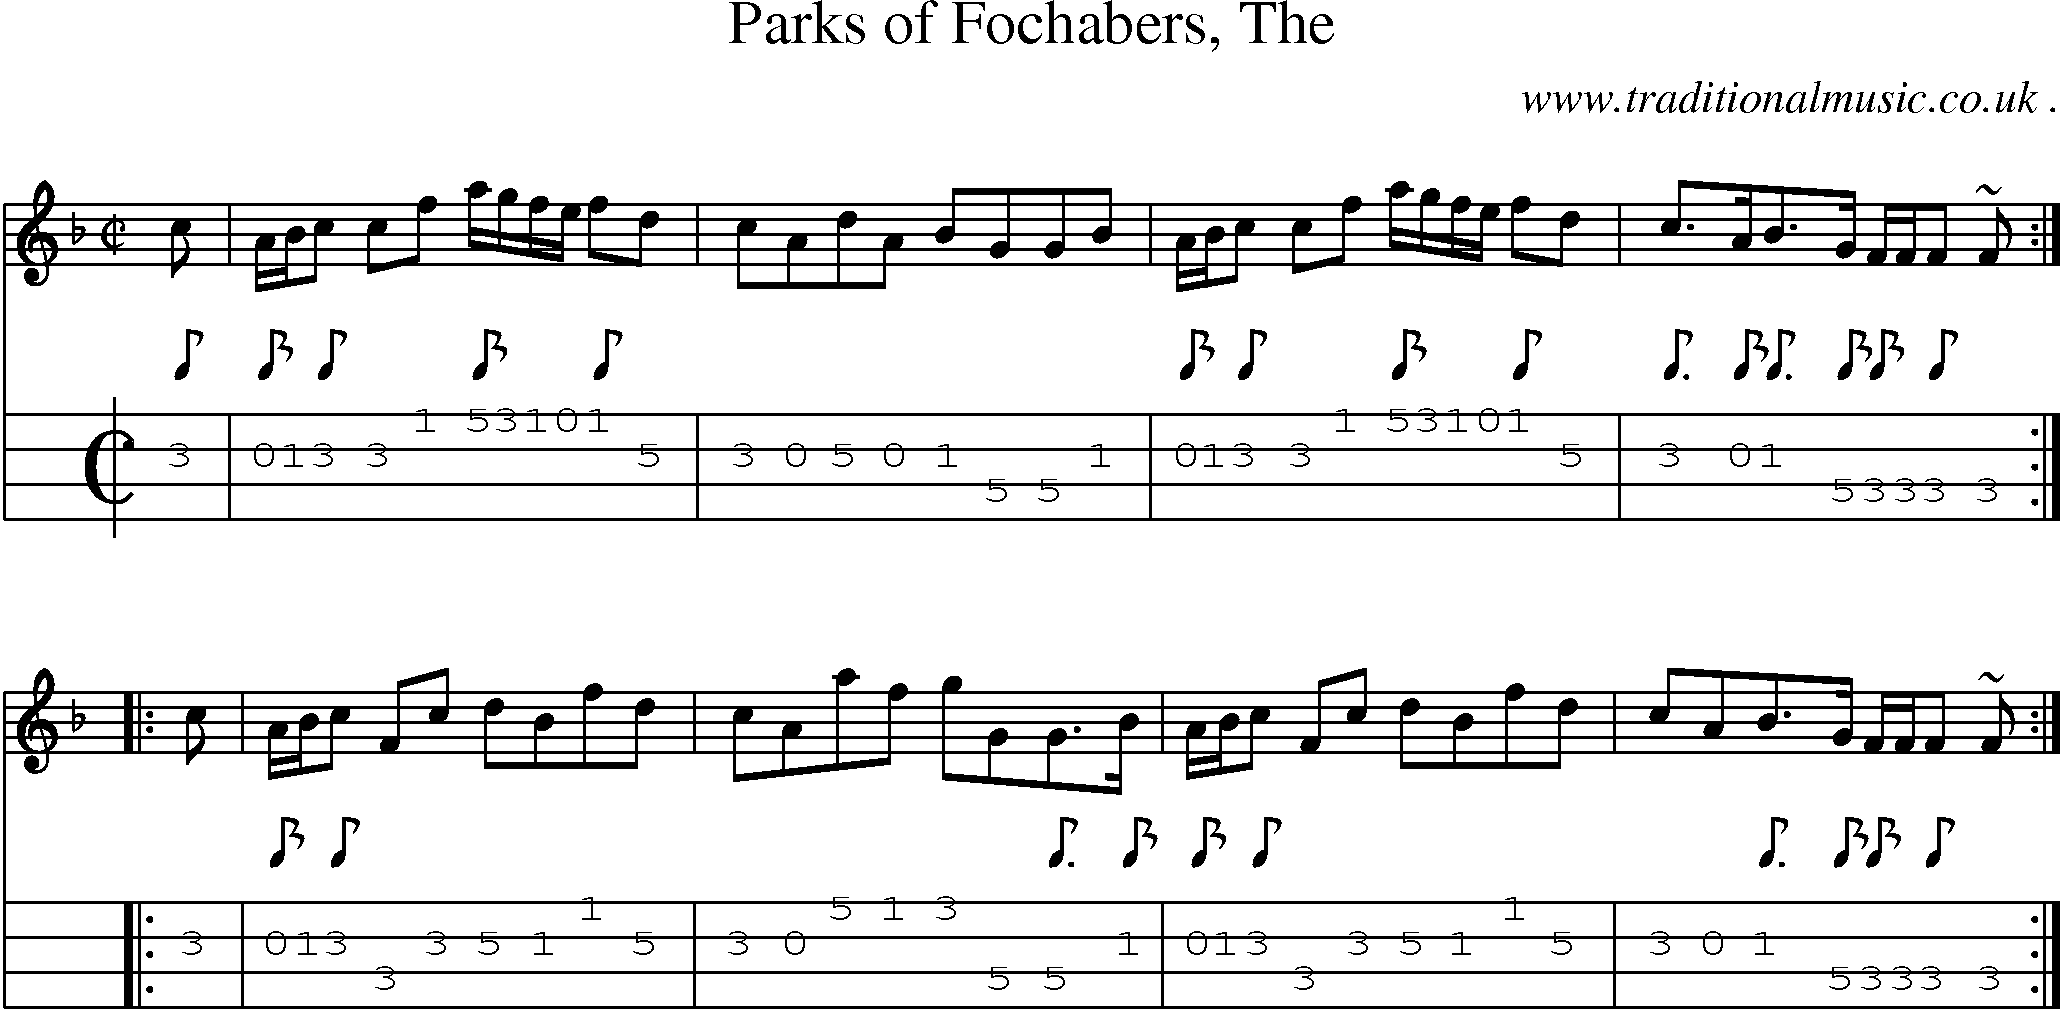 Sheet-music  score, Chords and Mandolin Tabs for Parks Of Fochabers The